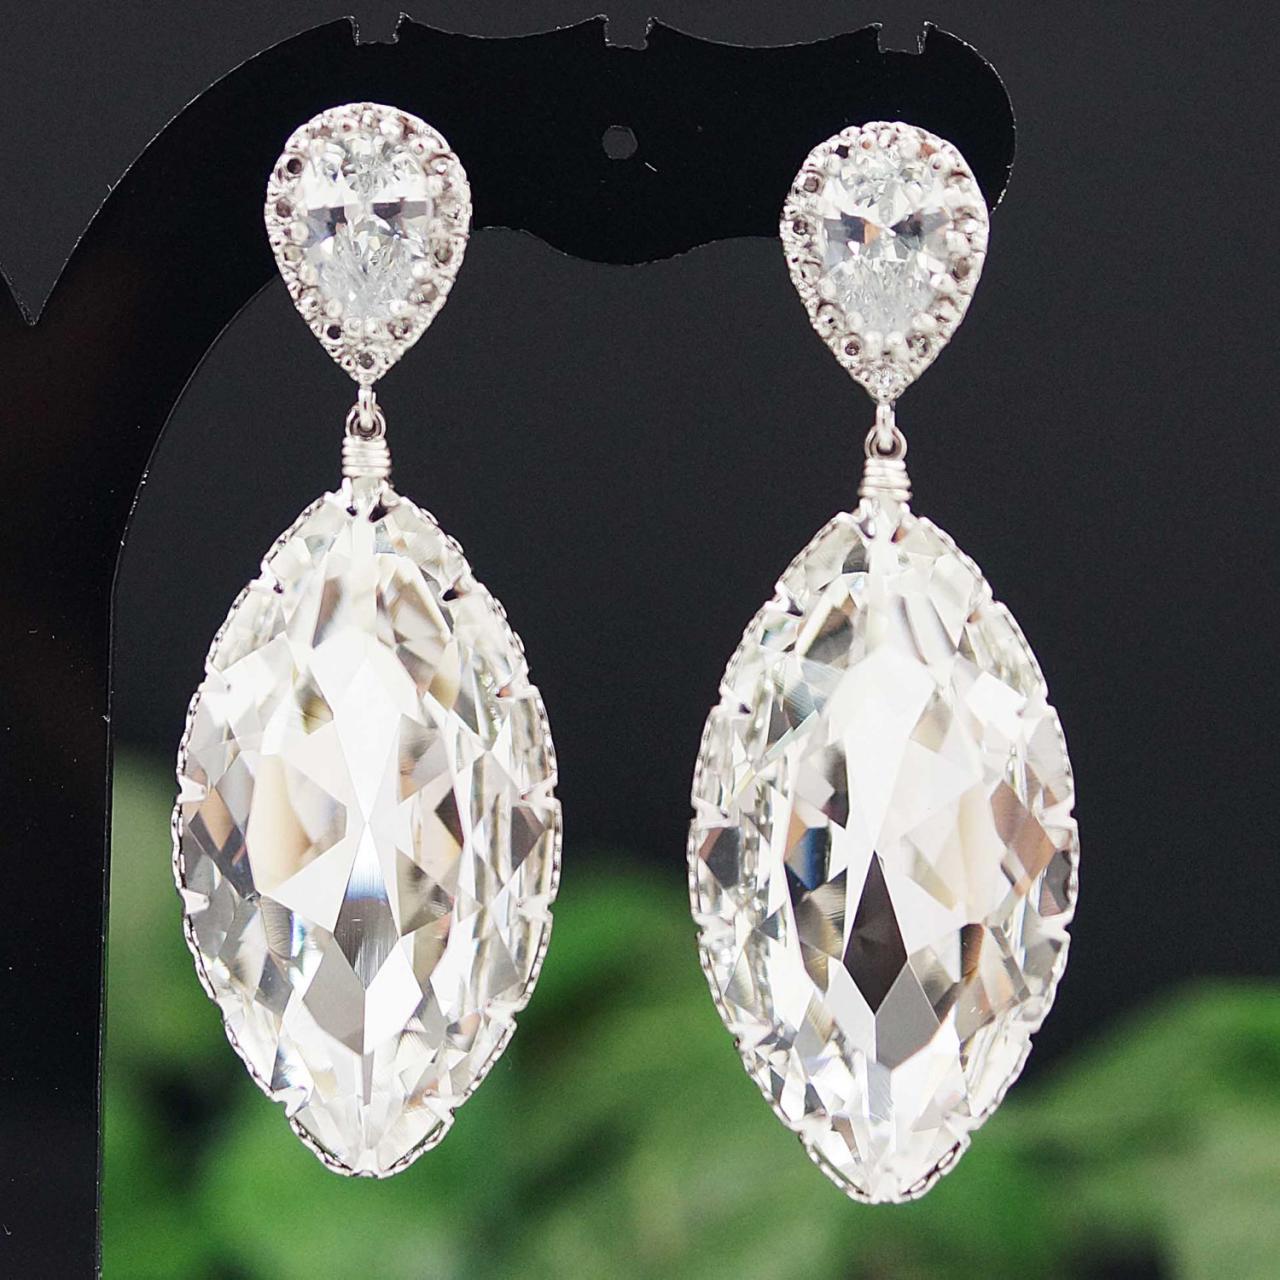 Matte Rodium Plated Cubic Zirconia Ear Posts With Clear White Swarovski Crystal Navette Drops Bridal Earrings